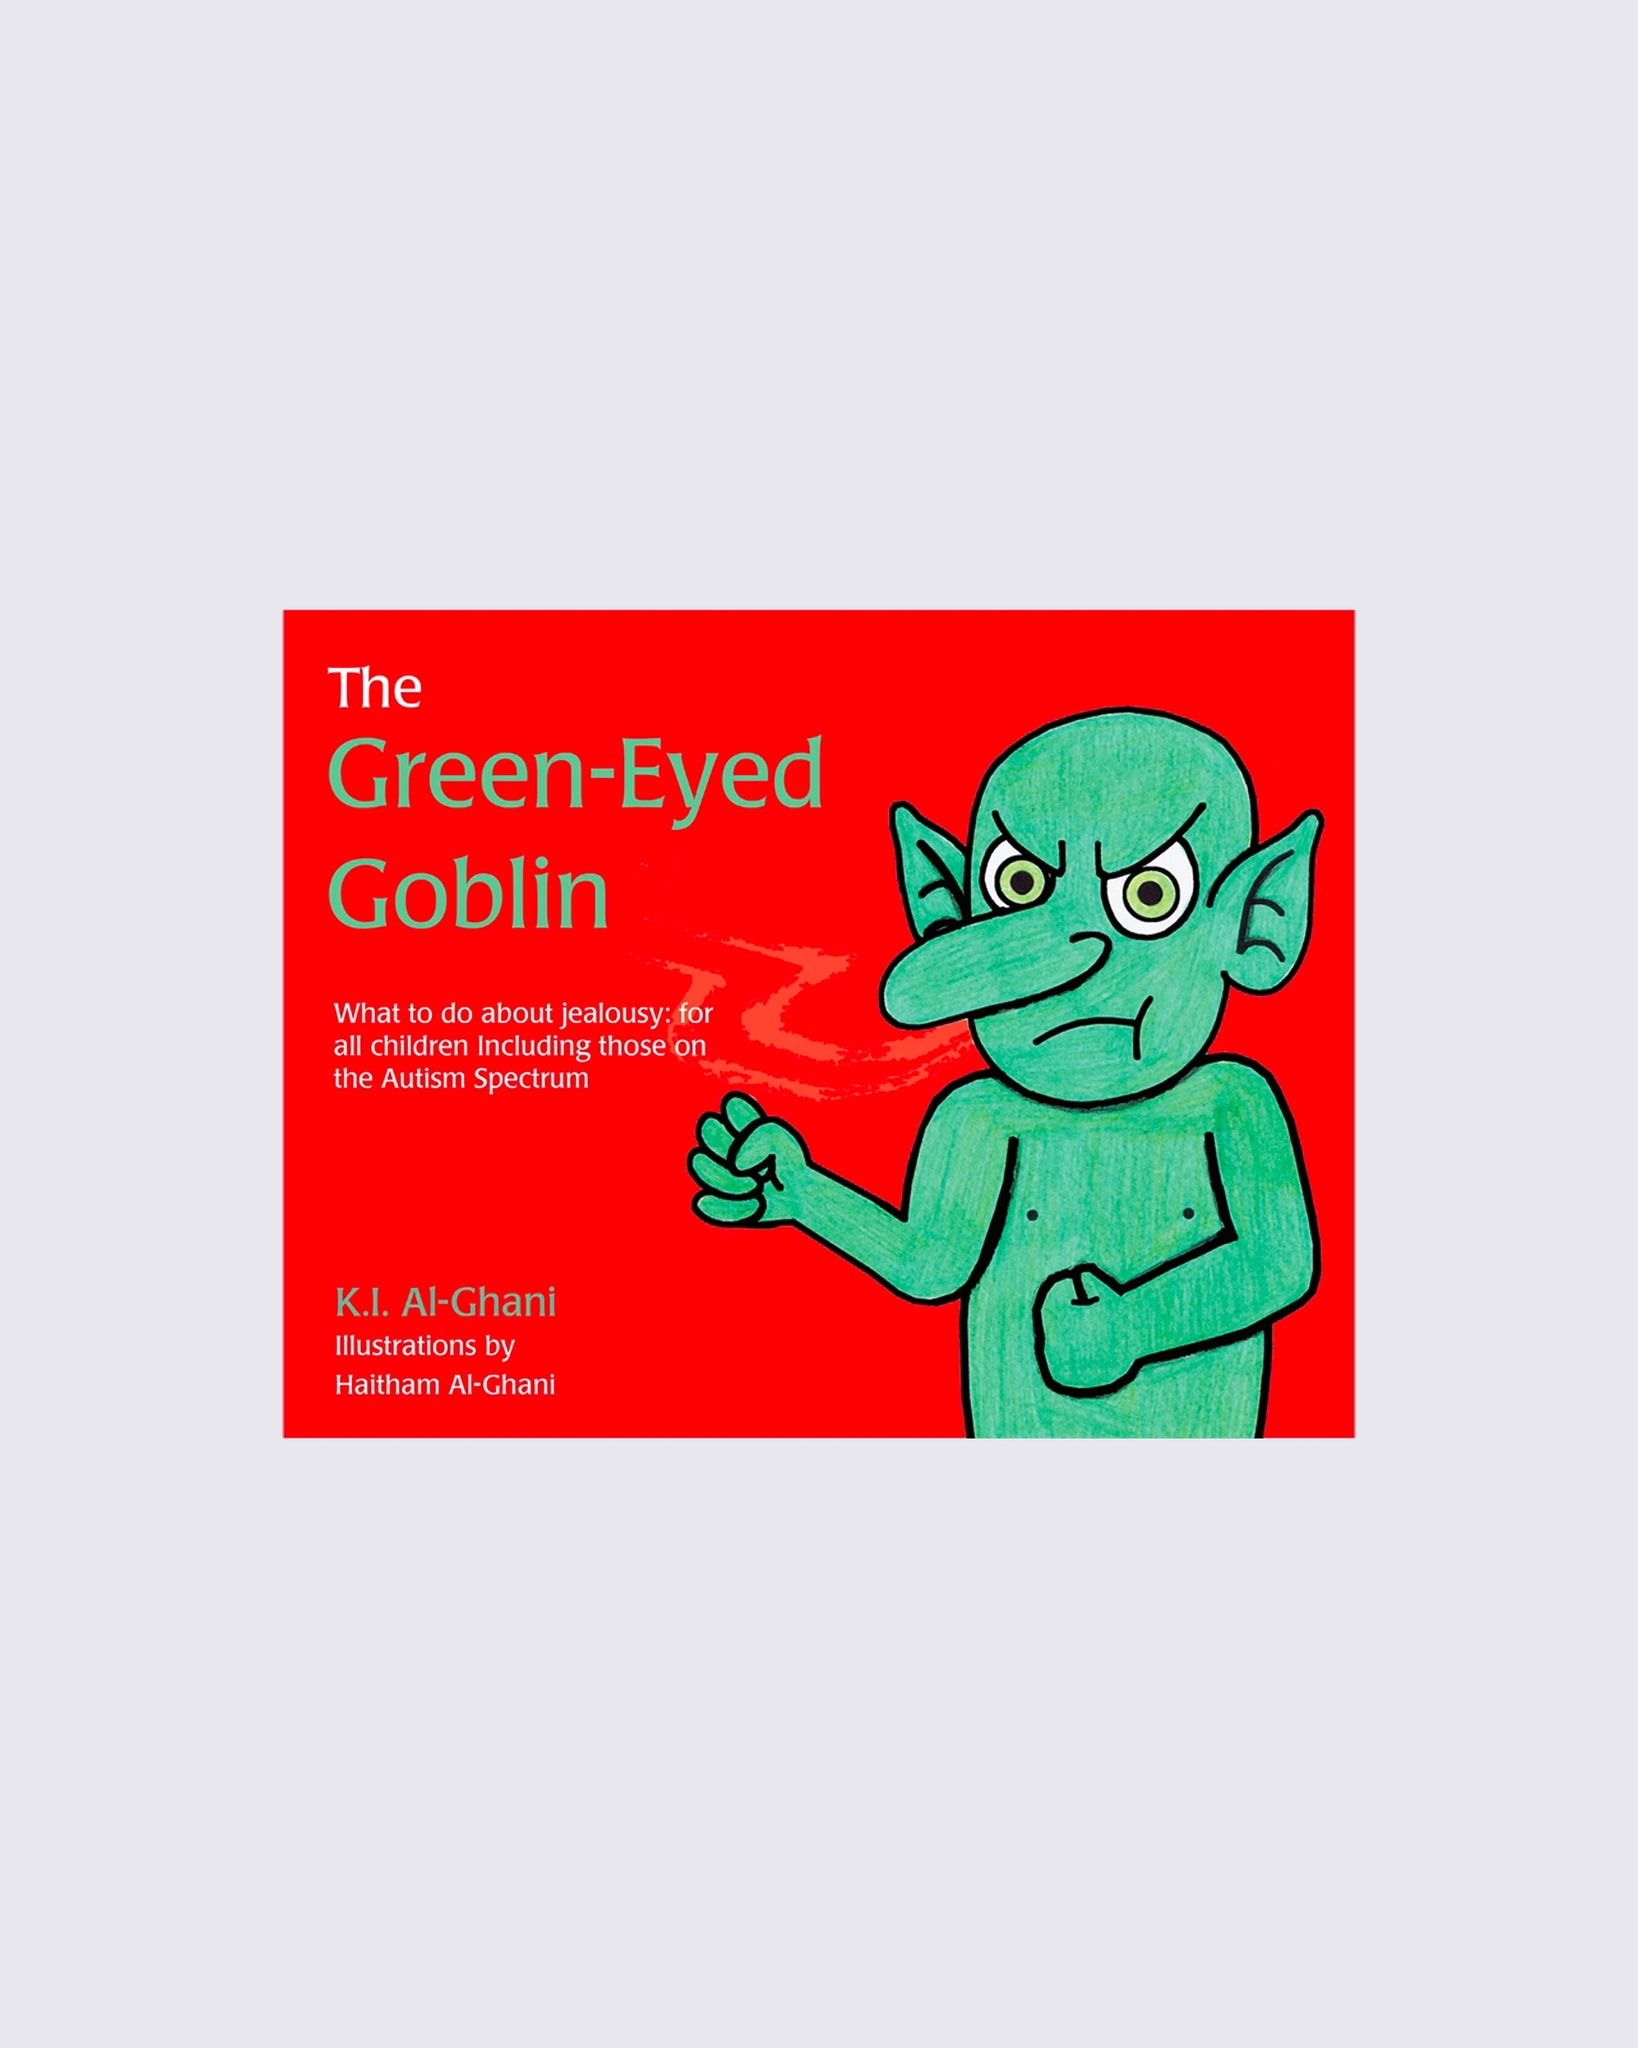 The Green-Eyed Goblin: What to Do About Jealousy - for All Children Including Those on the Autism Spectrum